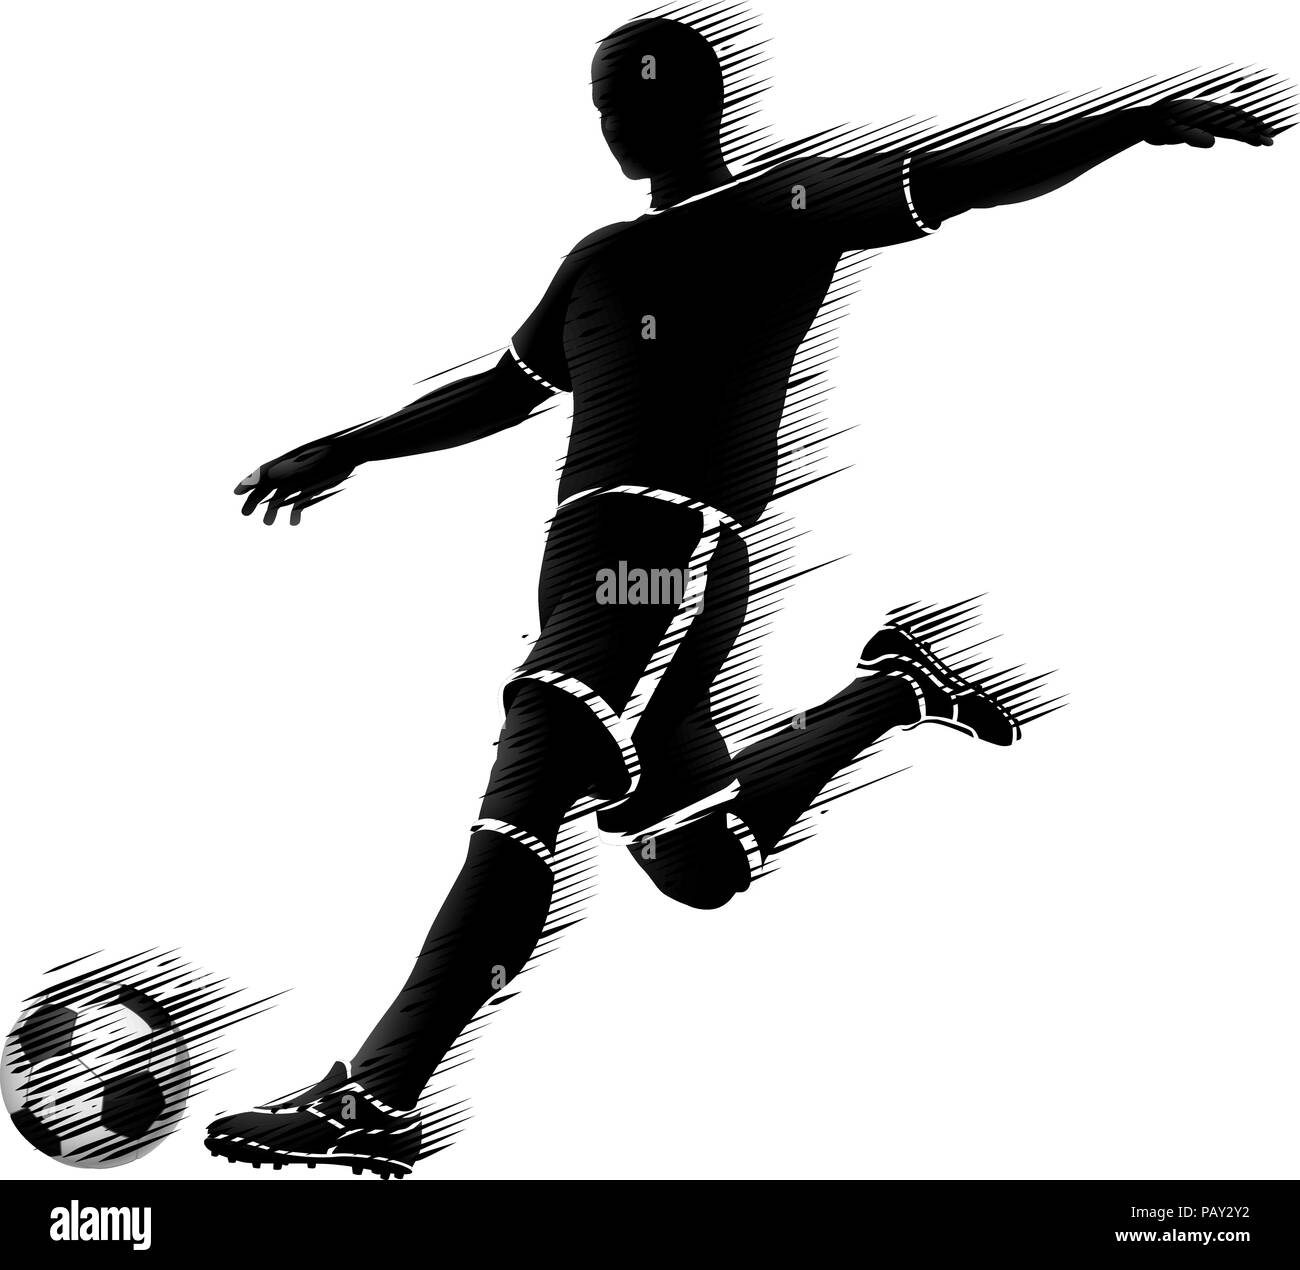 Soccer Football Player Sports Silhouette Concept Stock Vector